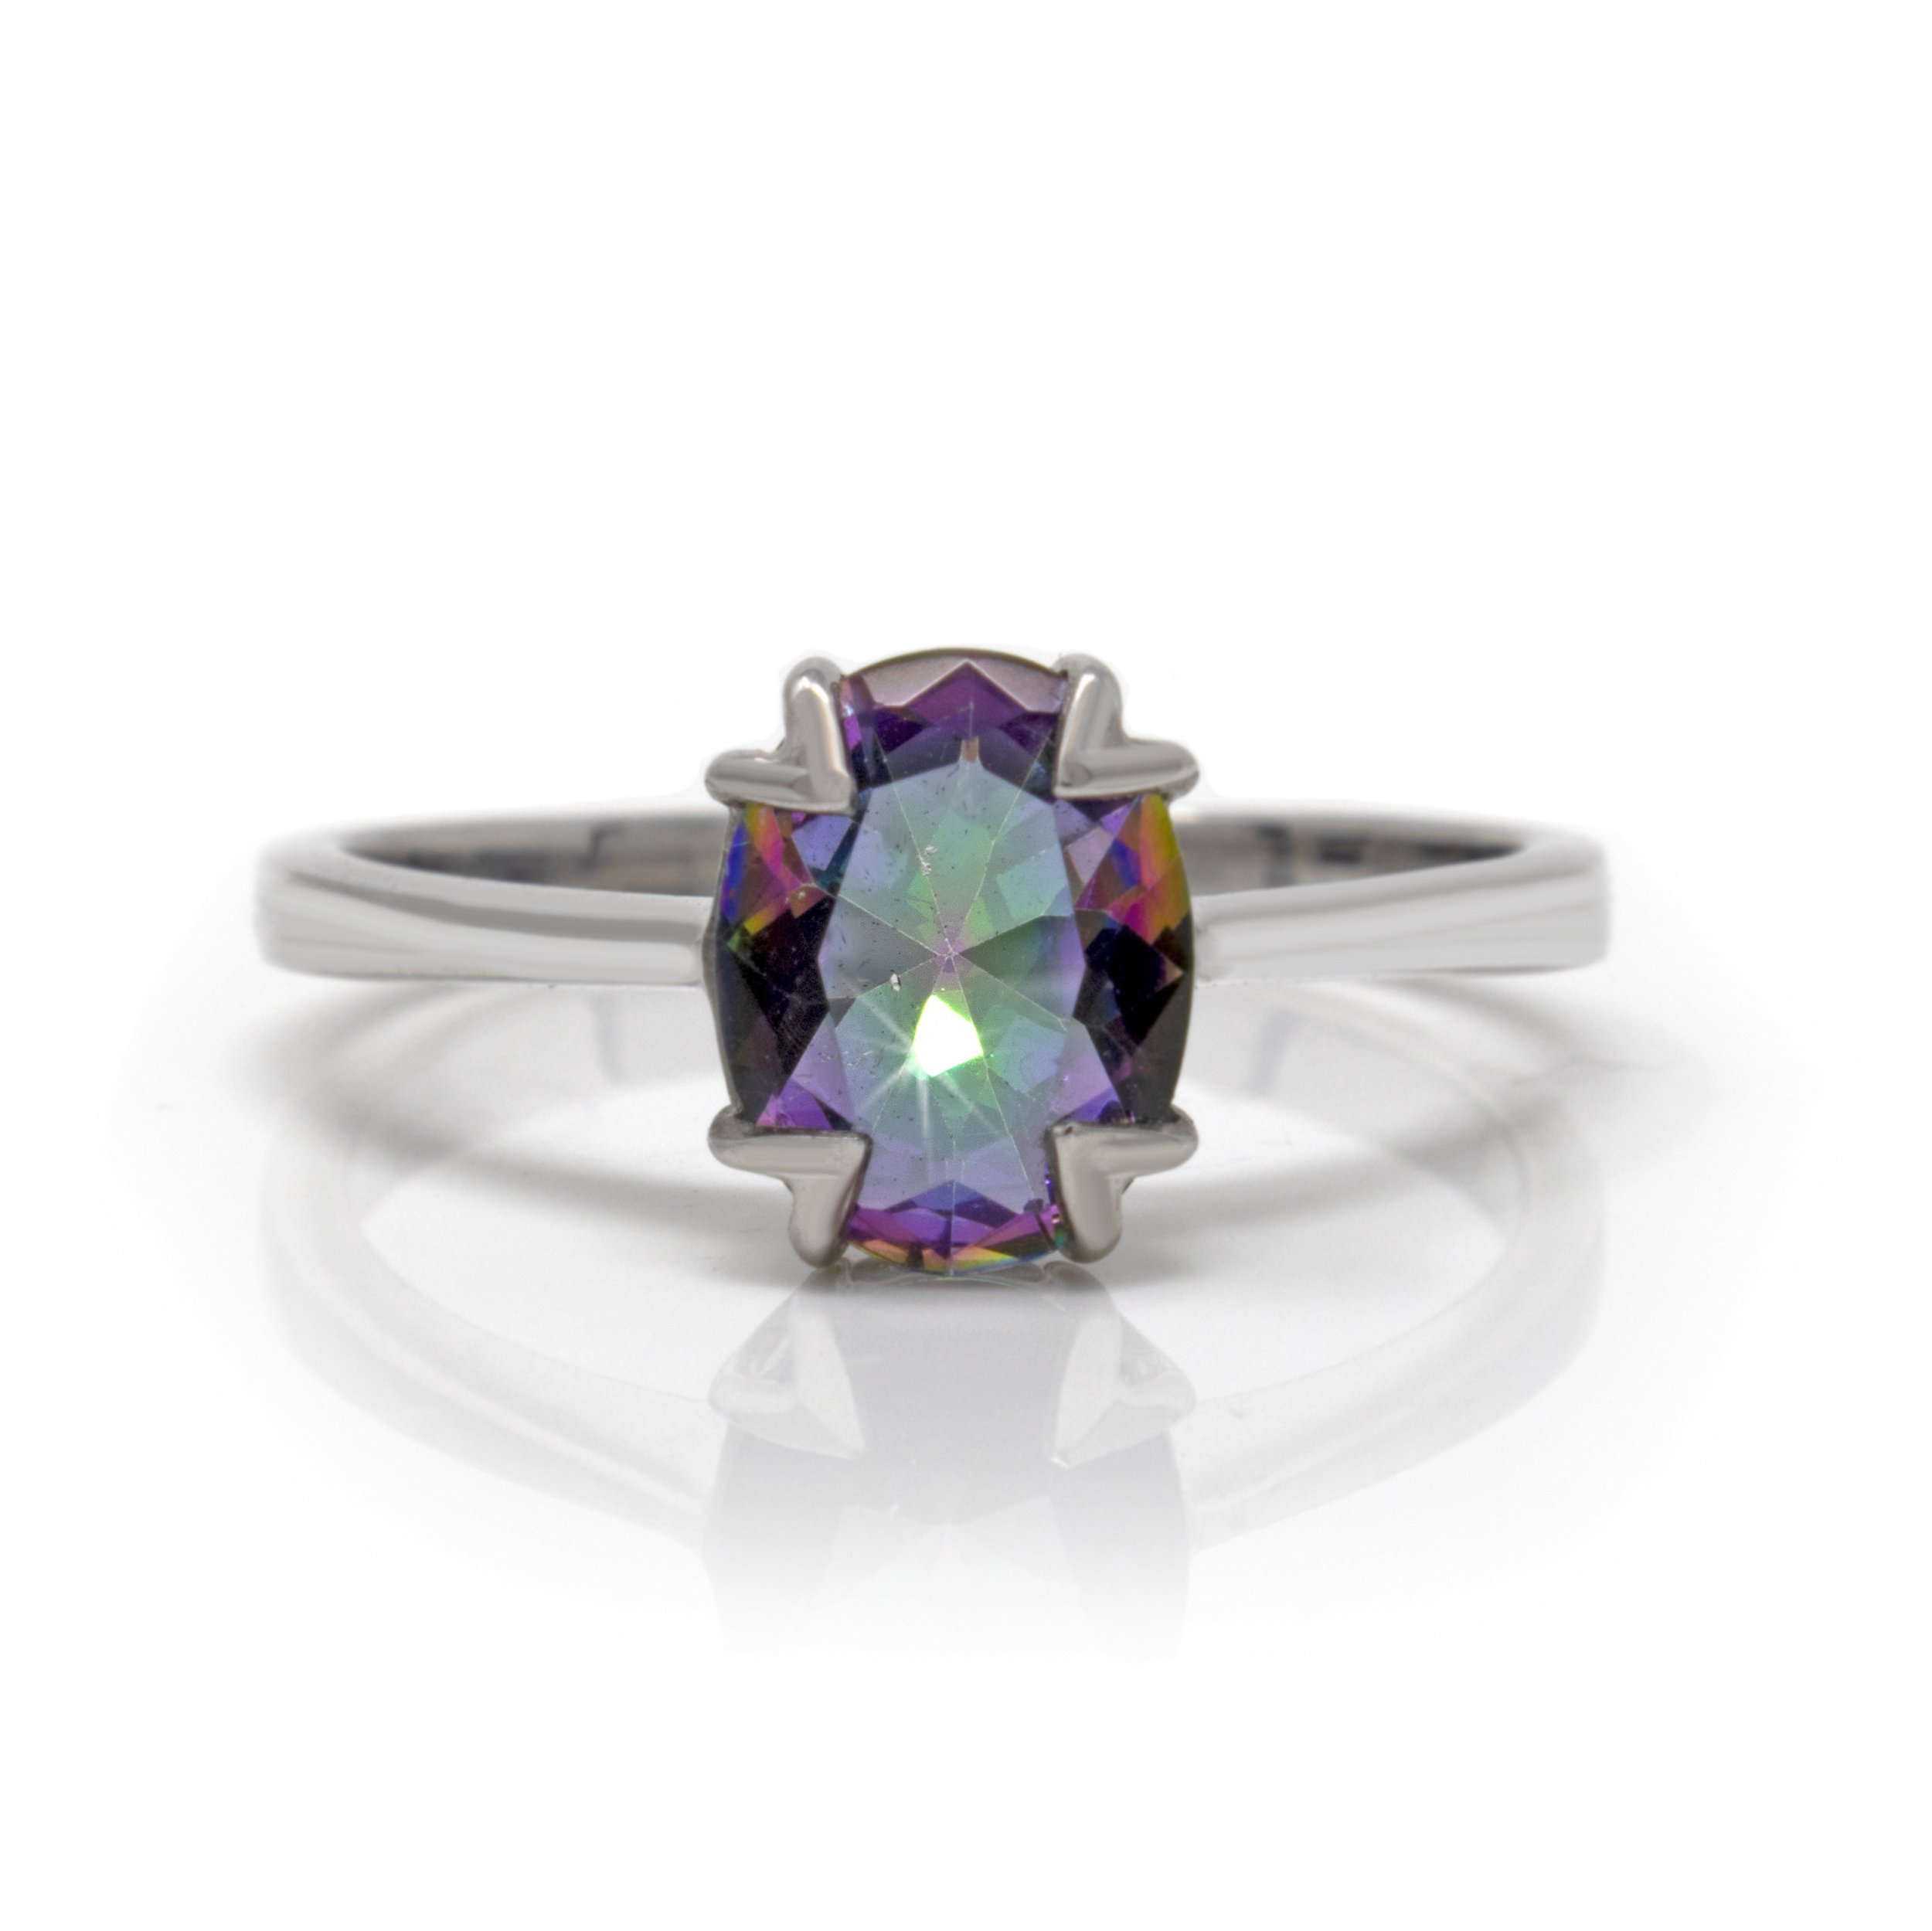 Mystic Topaz Ring Size 10 - Faceted Prong Set Oval With Fancy Open Silver Prongs & Bezel Set On Silver Vert Band